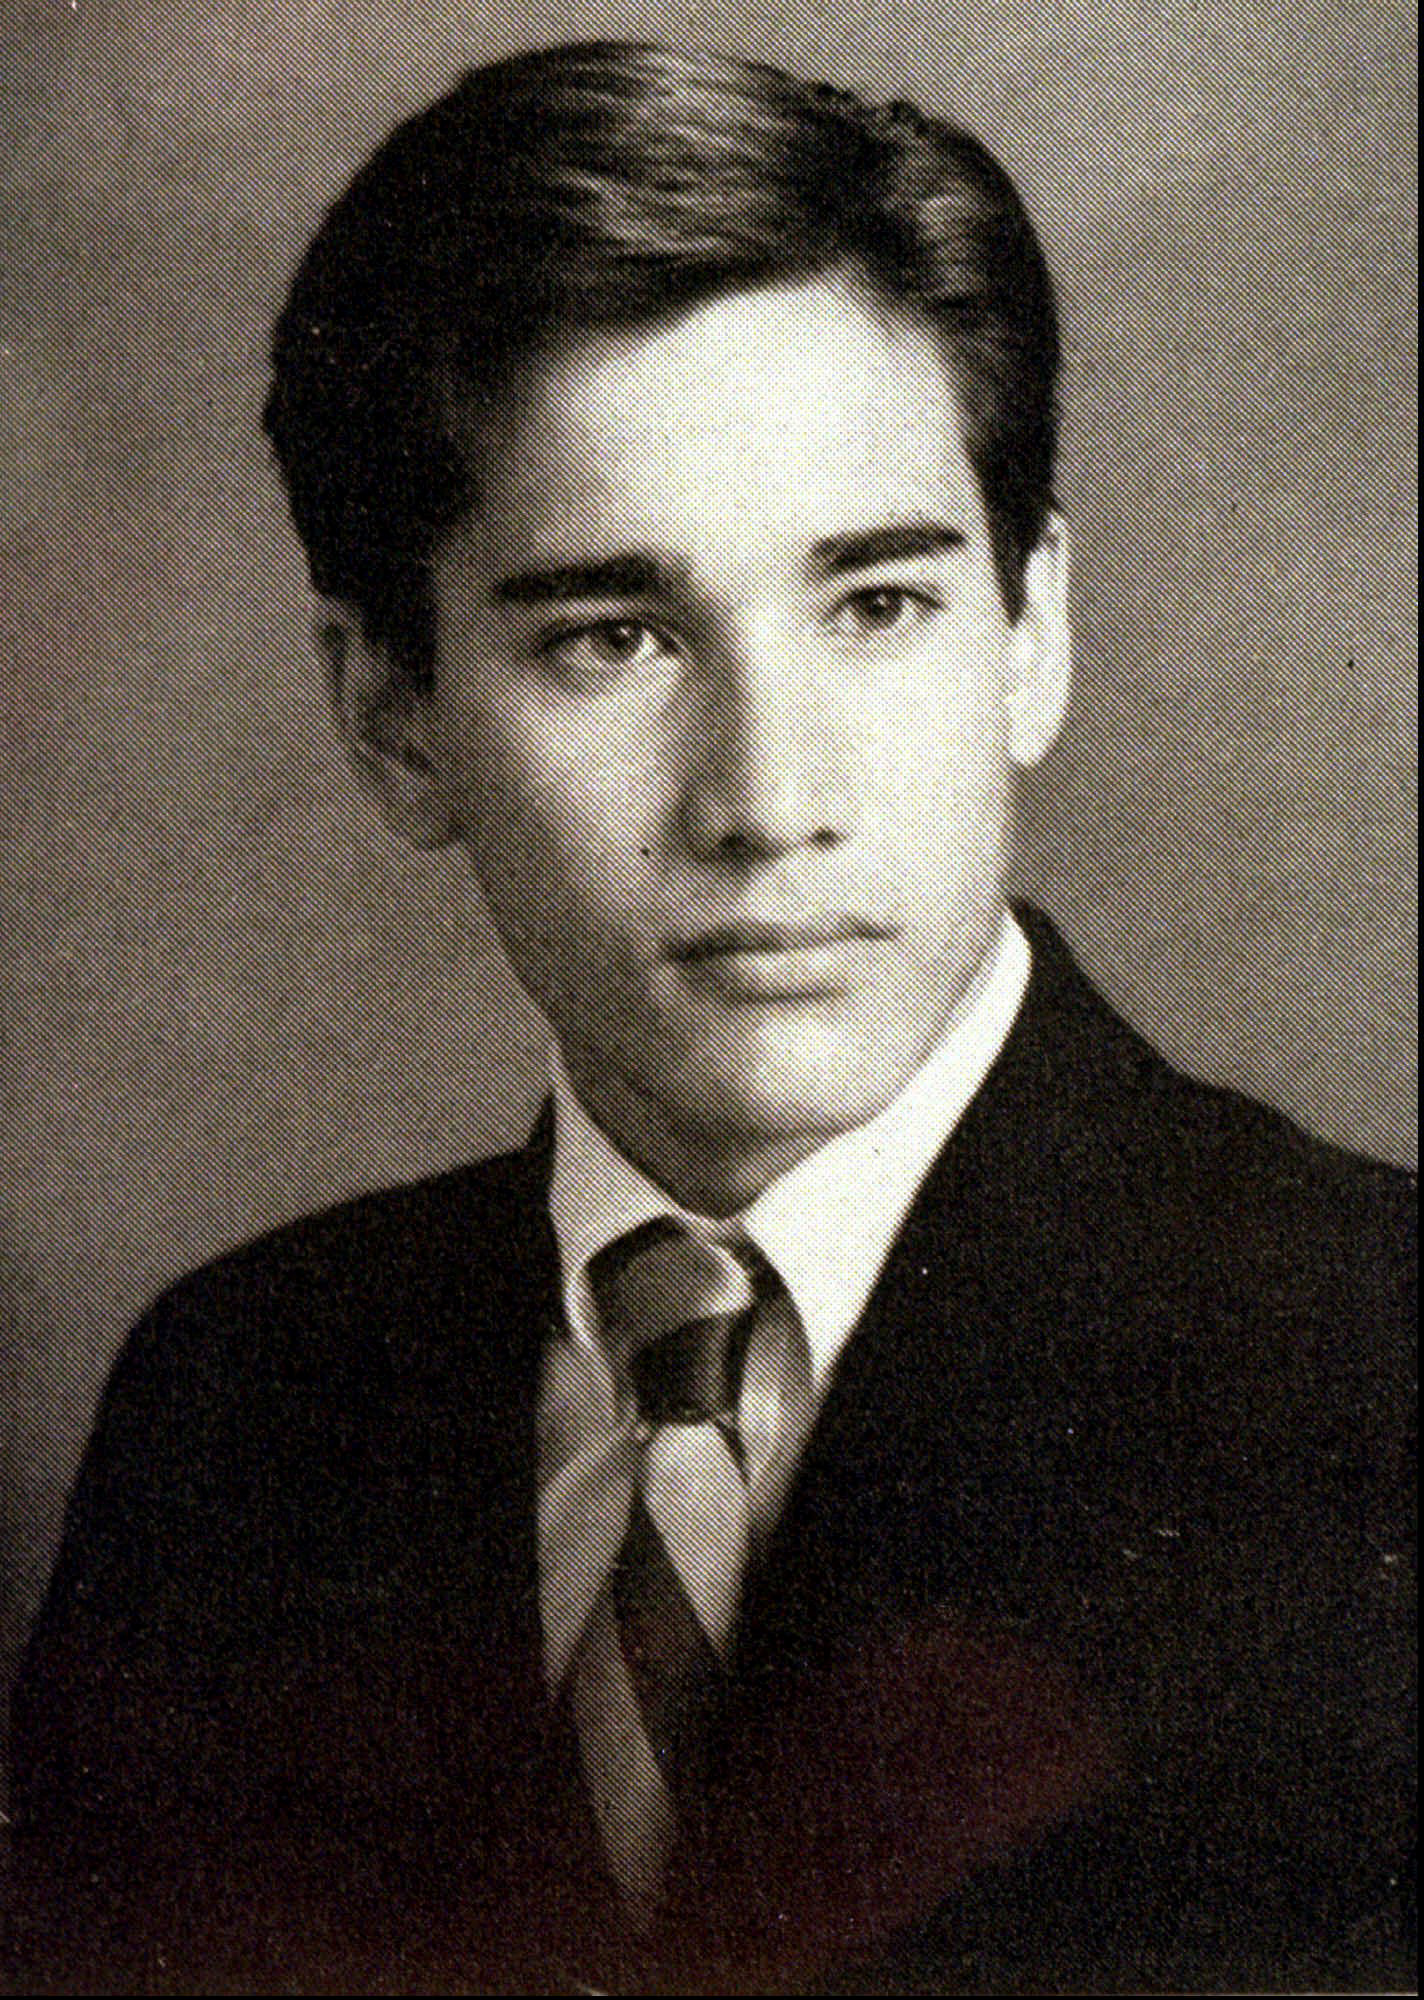 PHOTO: Suspected serial killer Andrew Cunanan is shown in his 1987 high school yearbook photo from The Bishop's School in San Diego, Calif. 